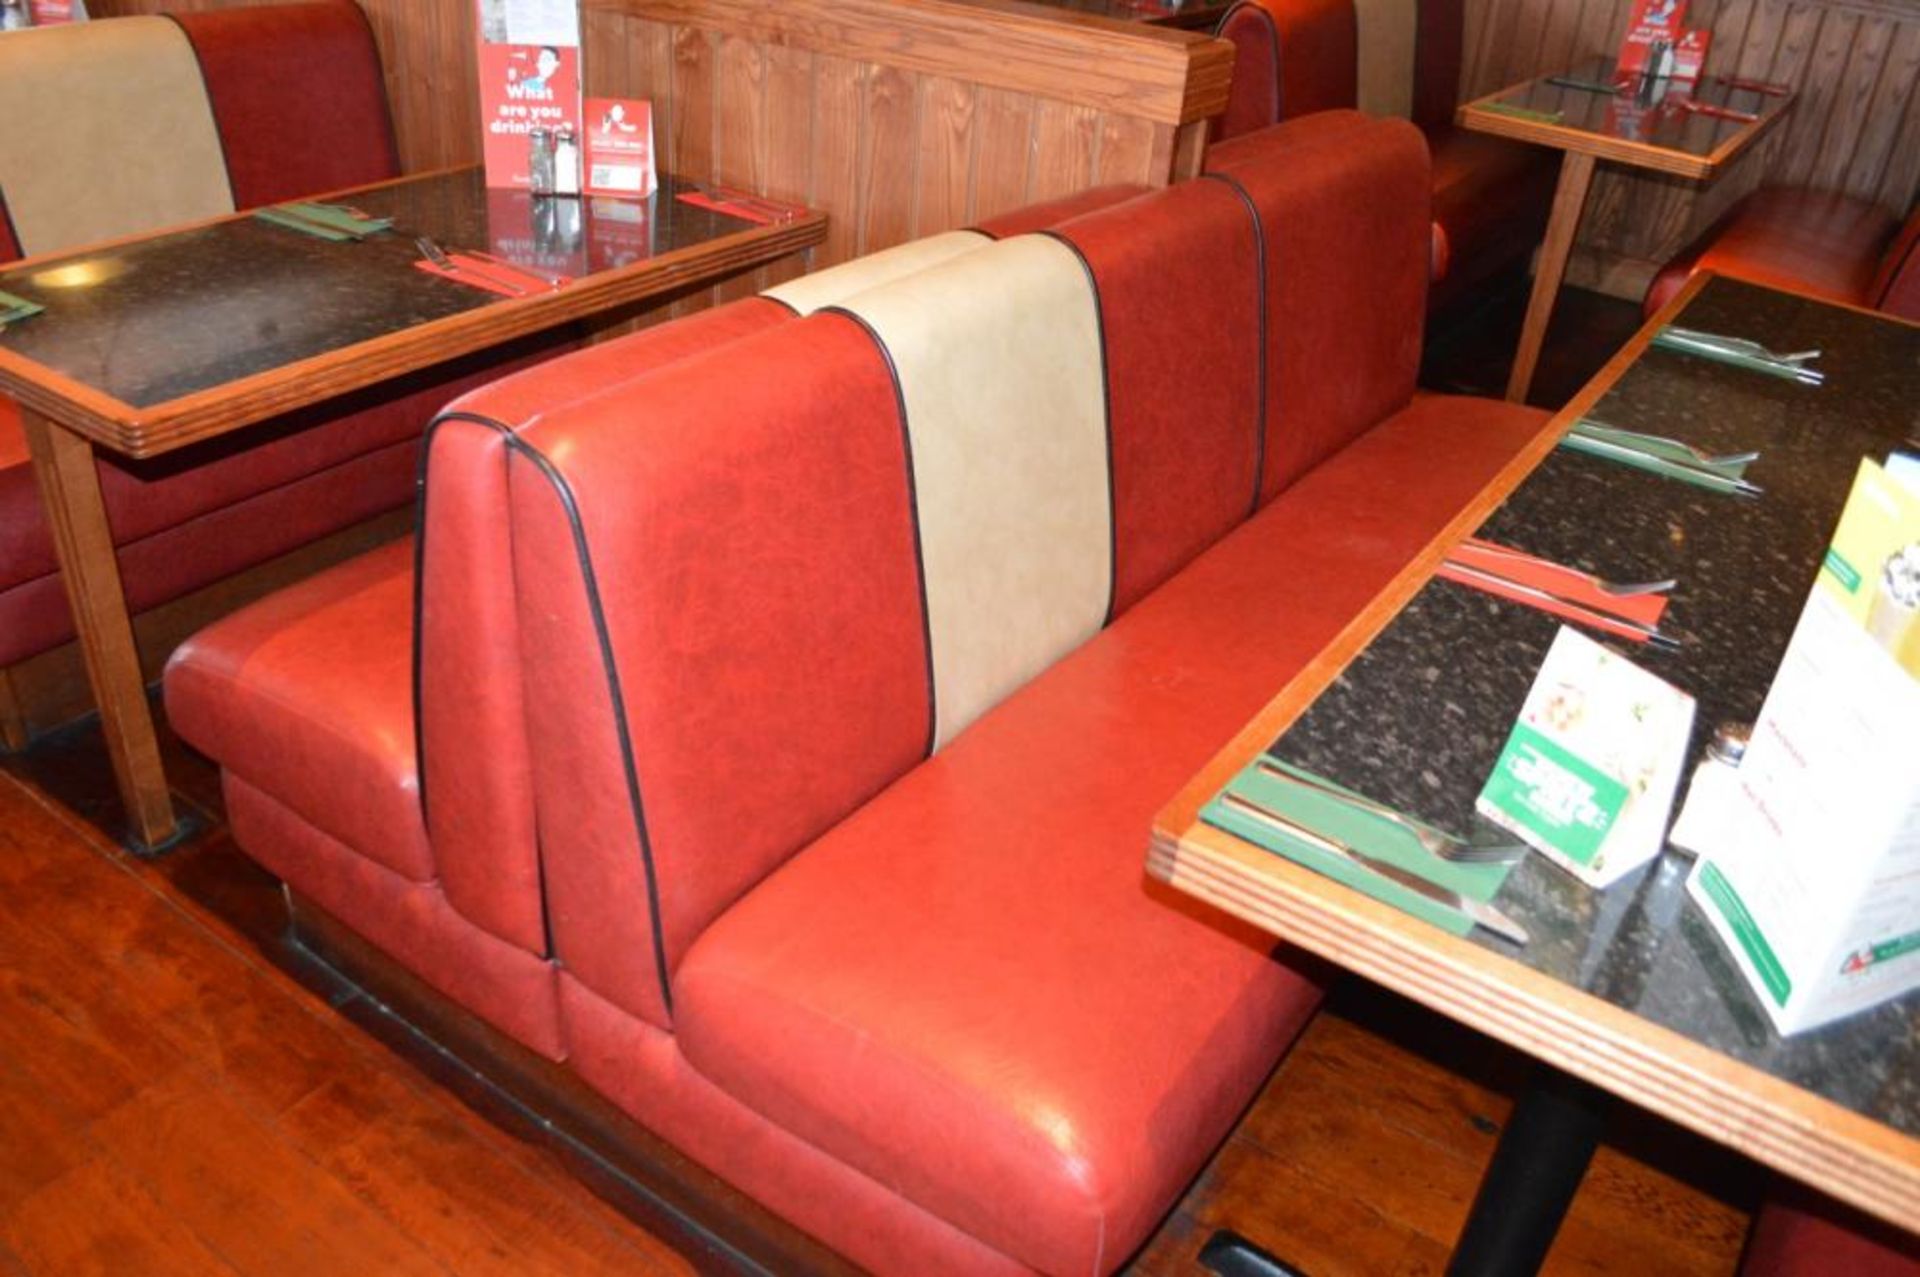 1 x Selection of Cosy Bespoke Seating Booths in a 1950's Retro American Diner Design With Dining Tab - Image 30 of 30